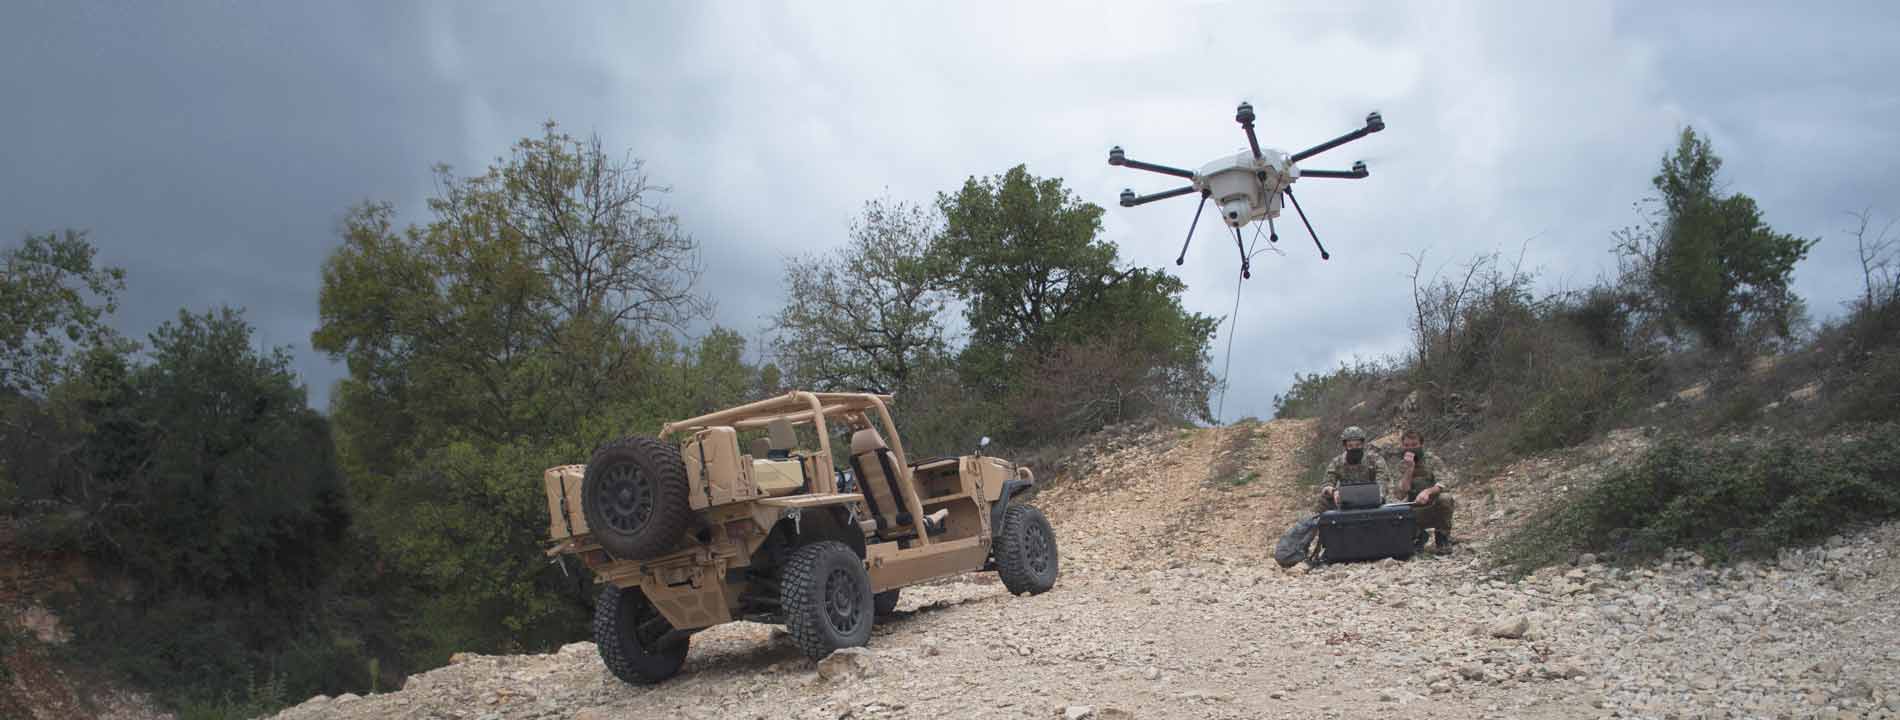 Orion tethered drone system deployment for defense and security